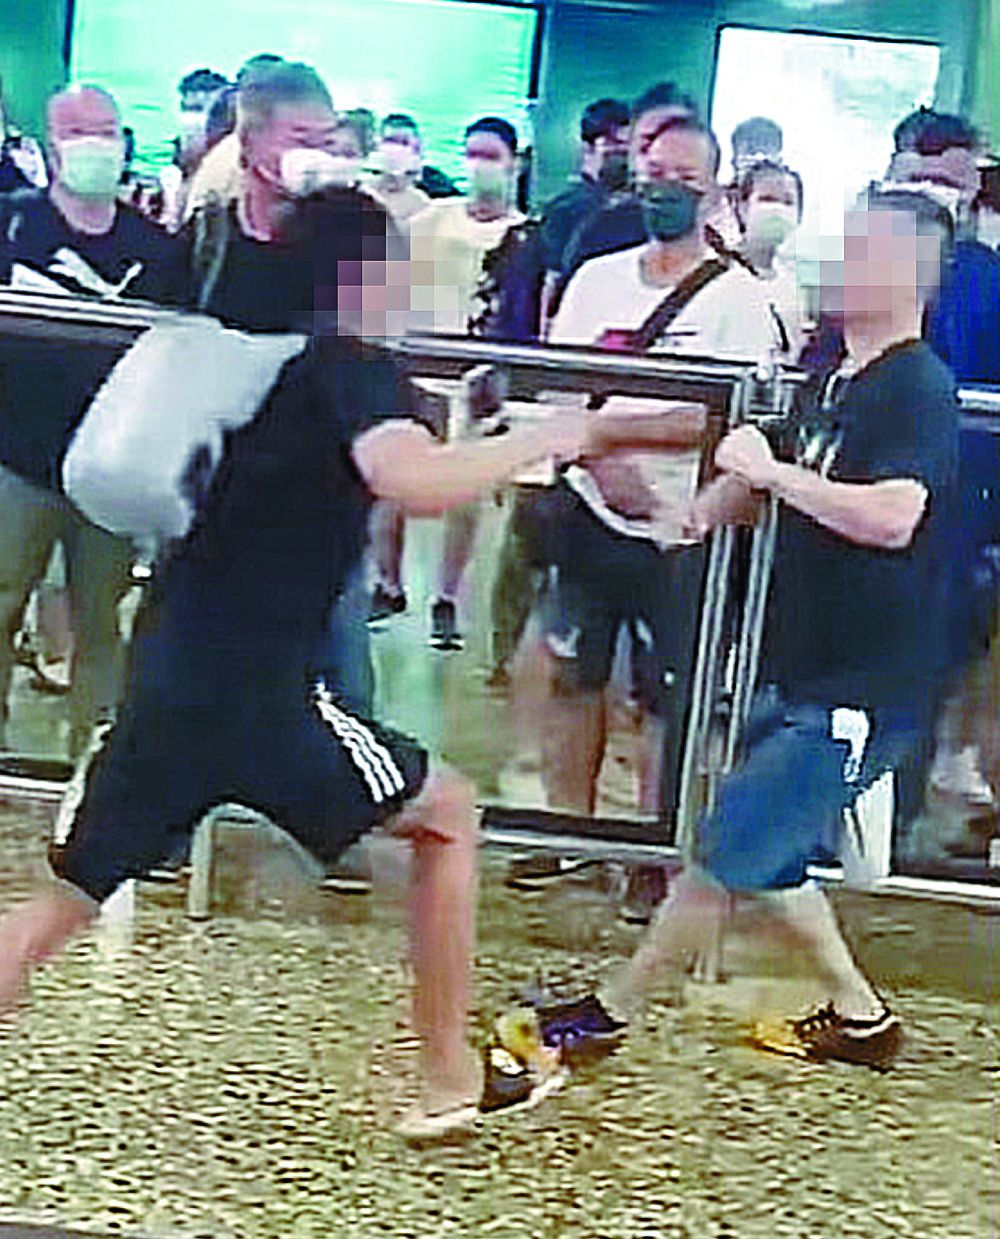 MTR station fighters kick up a storm